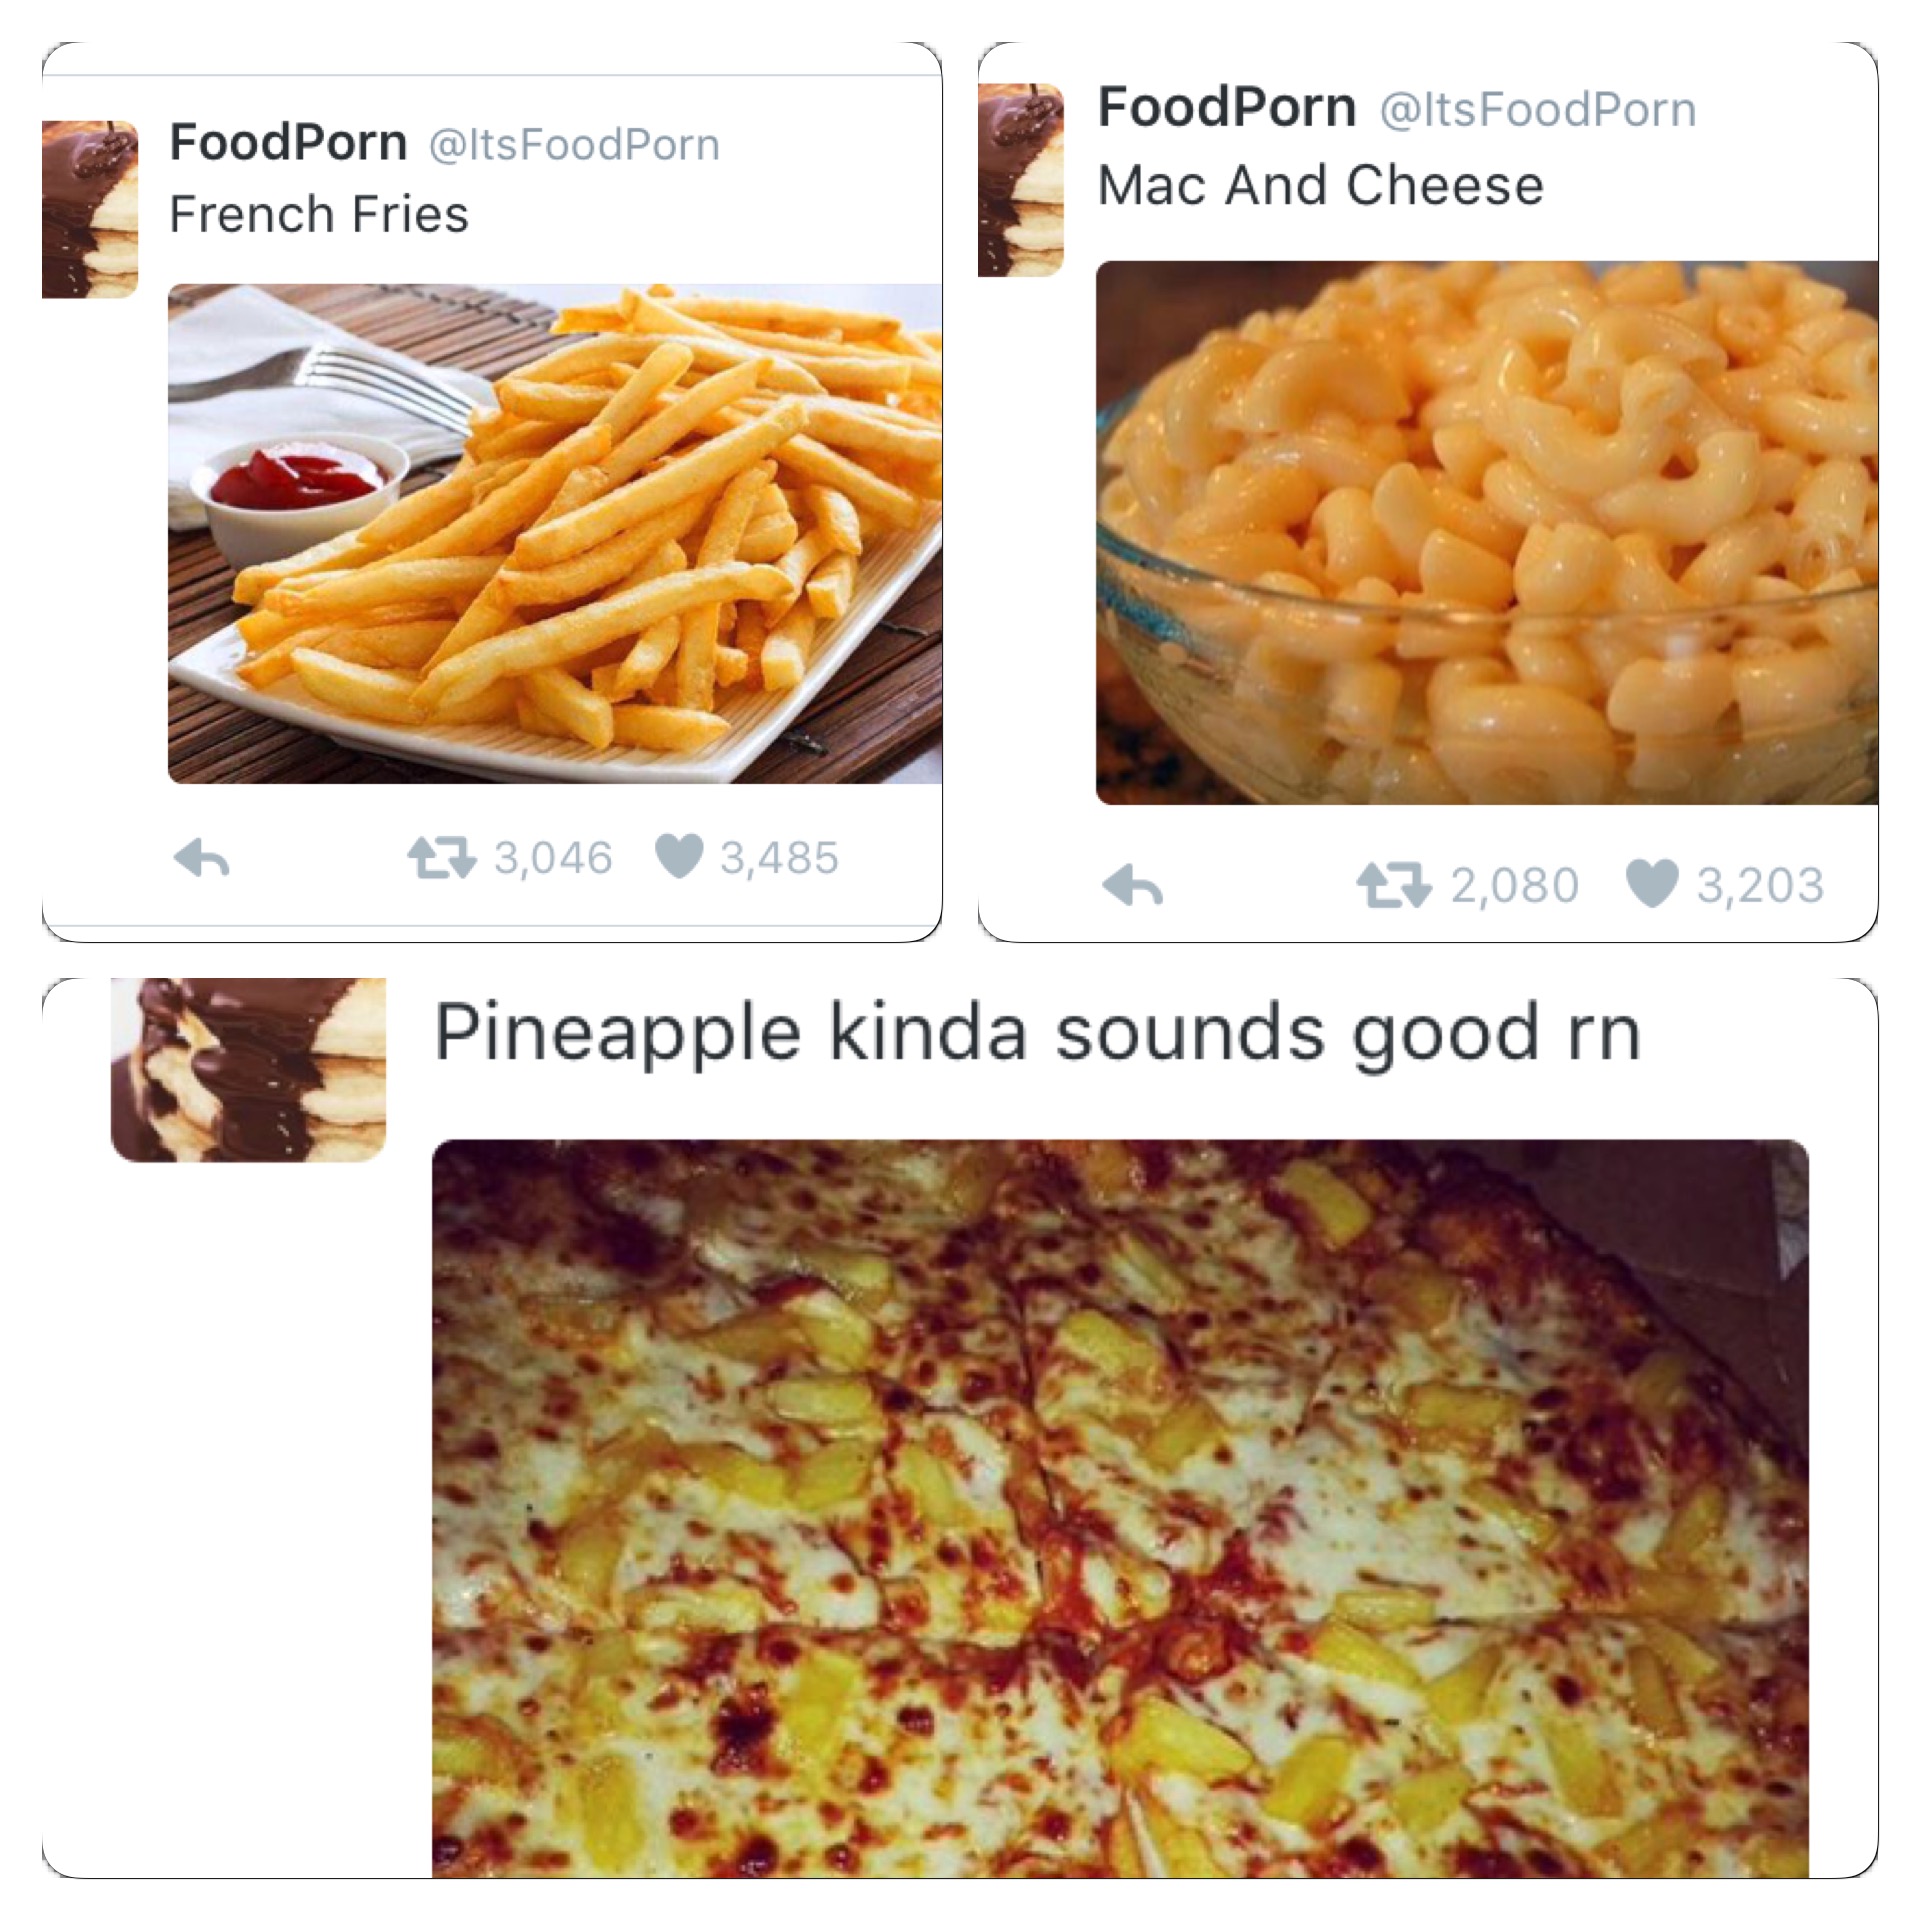 Sometimes, however, the food tweeted out looks very average and...old.